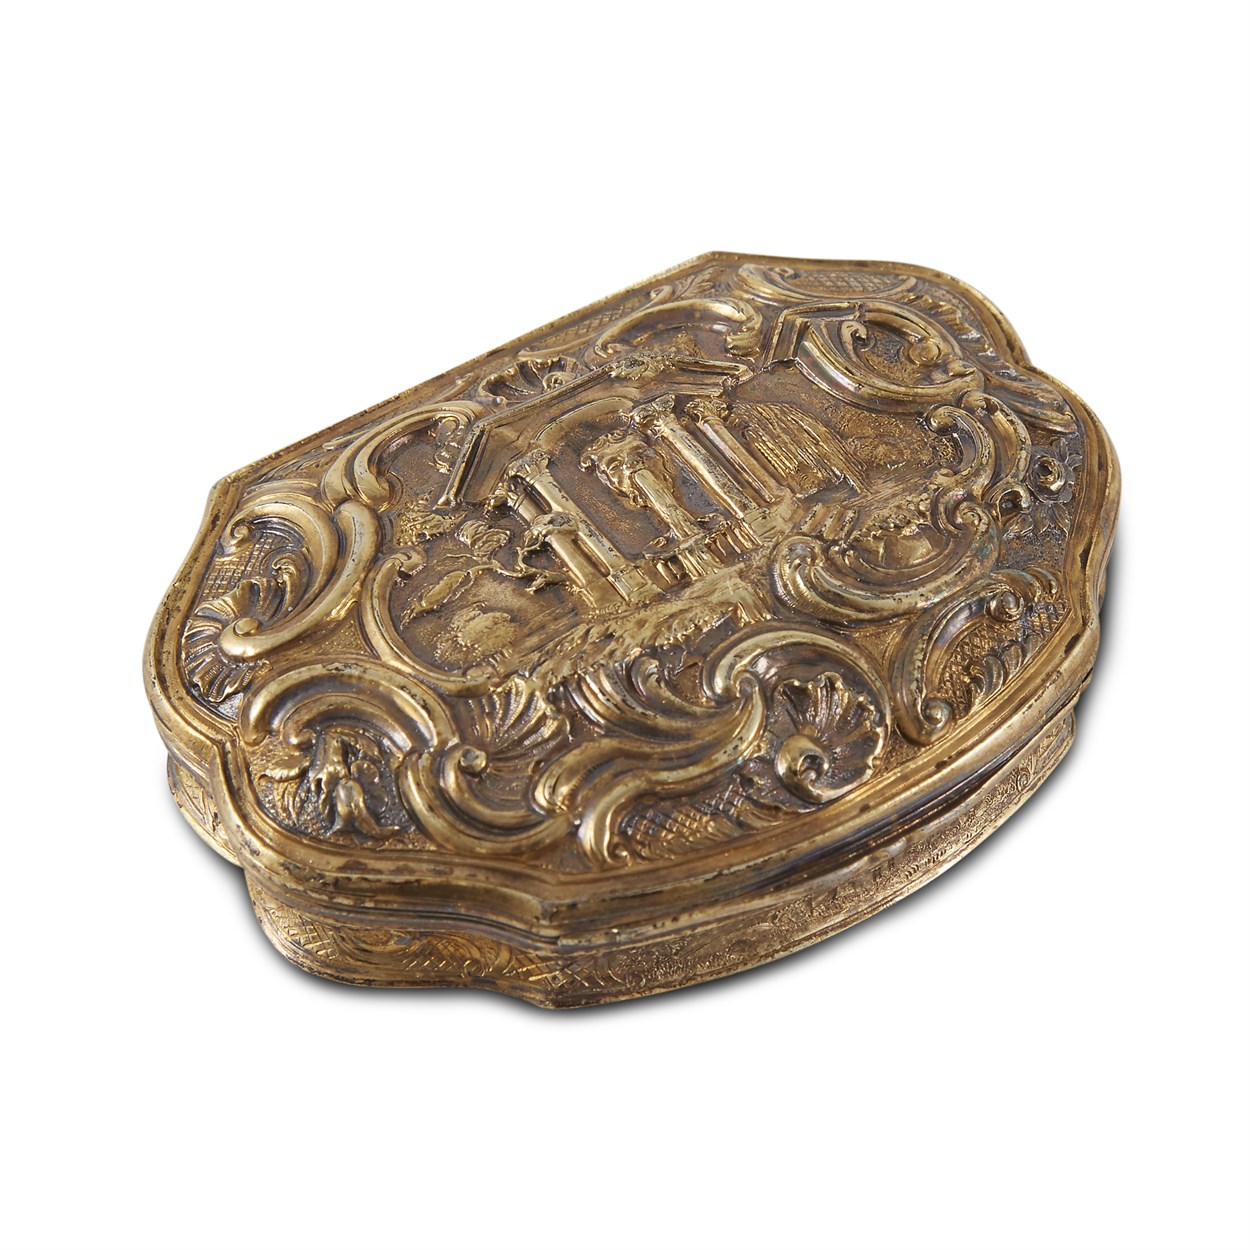 Lot 32 - ROYAL  A Scottish George IV silver-gilt snuffbox in the Louis XV style